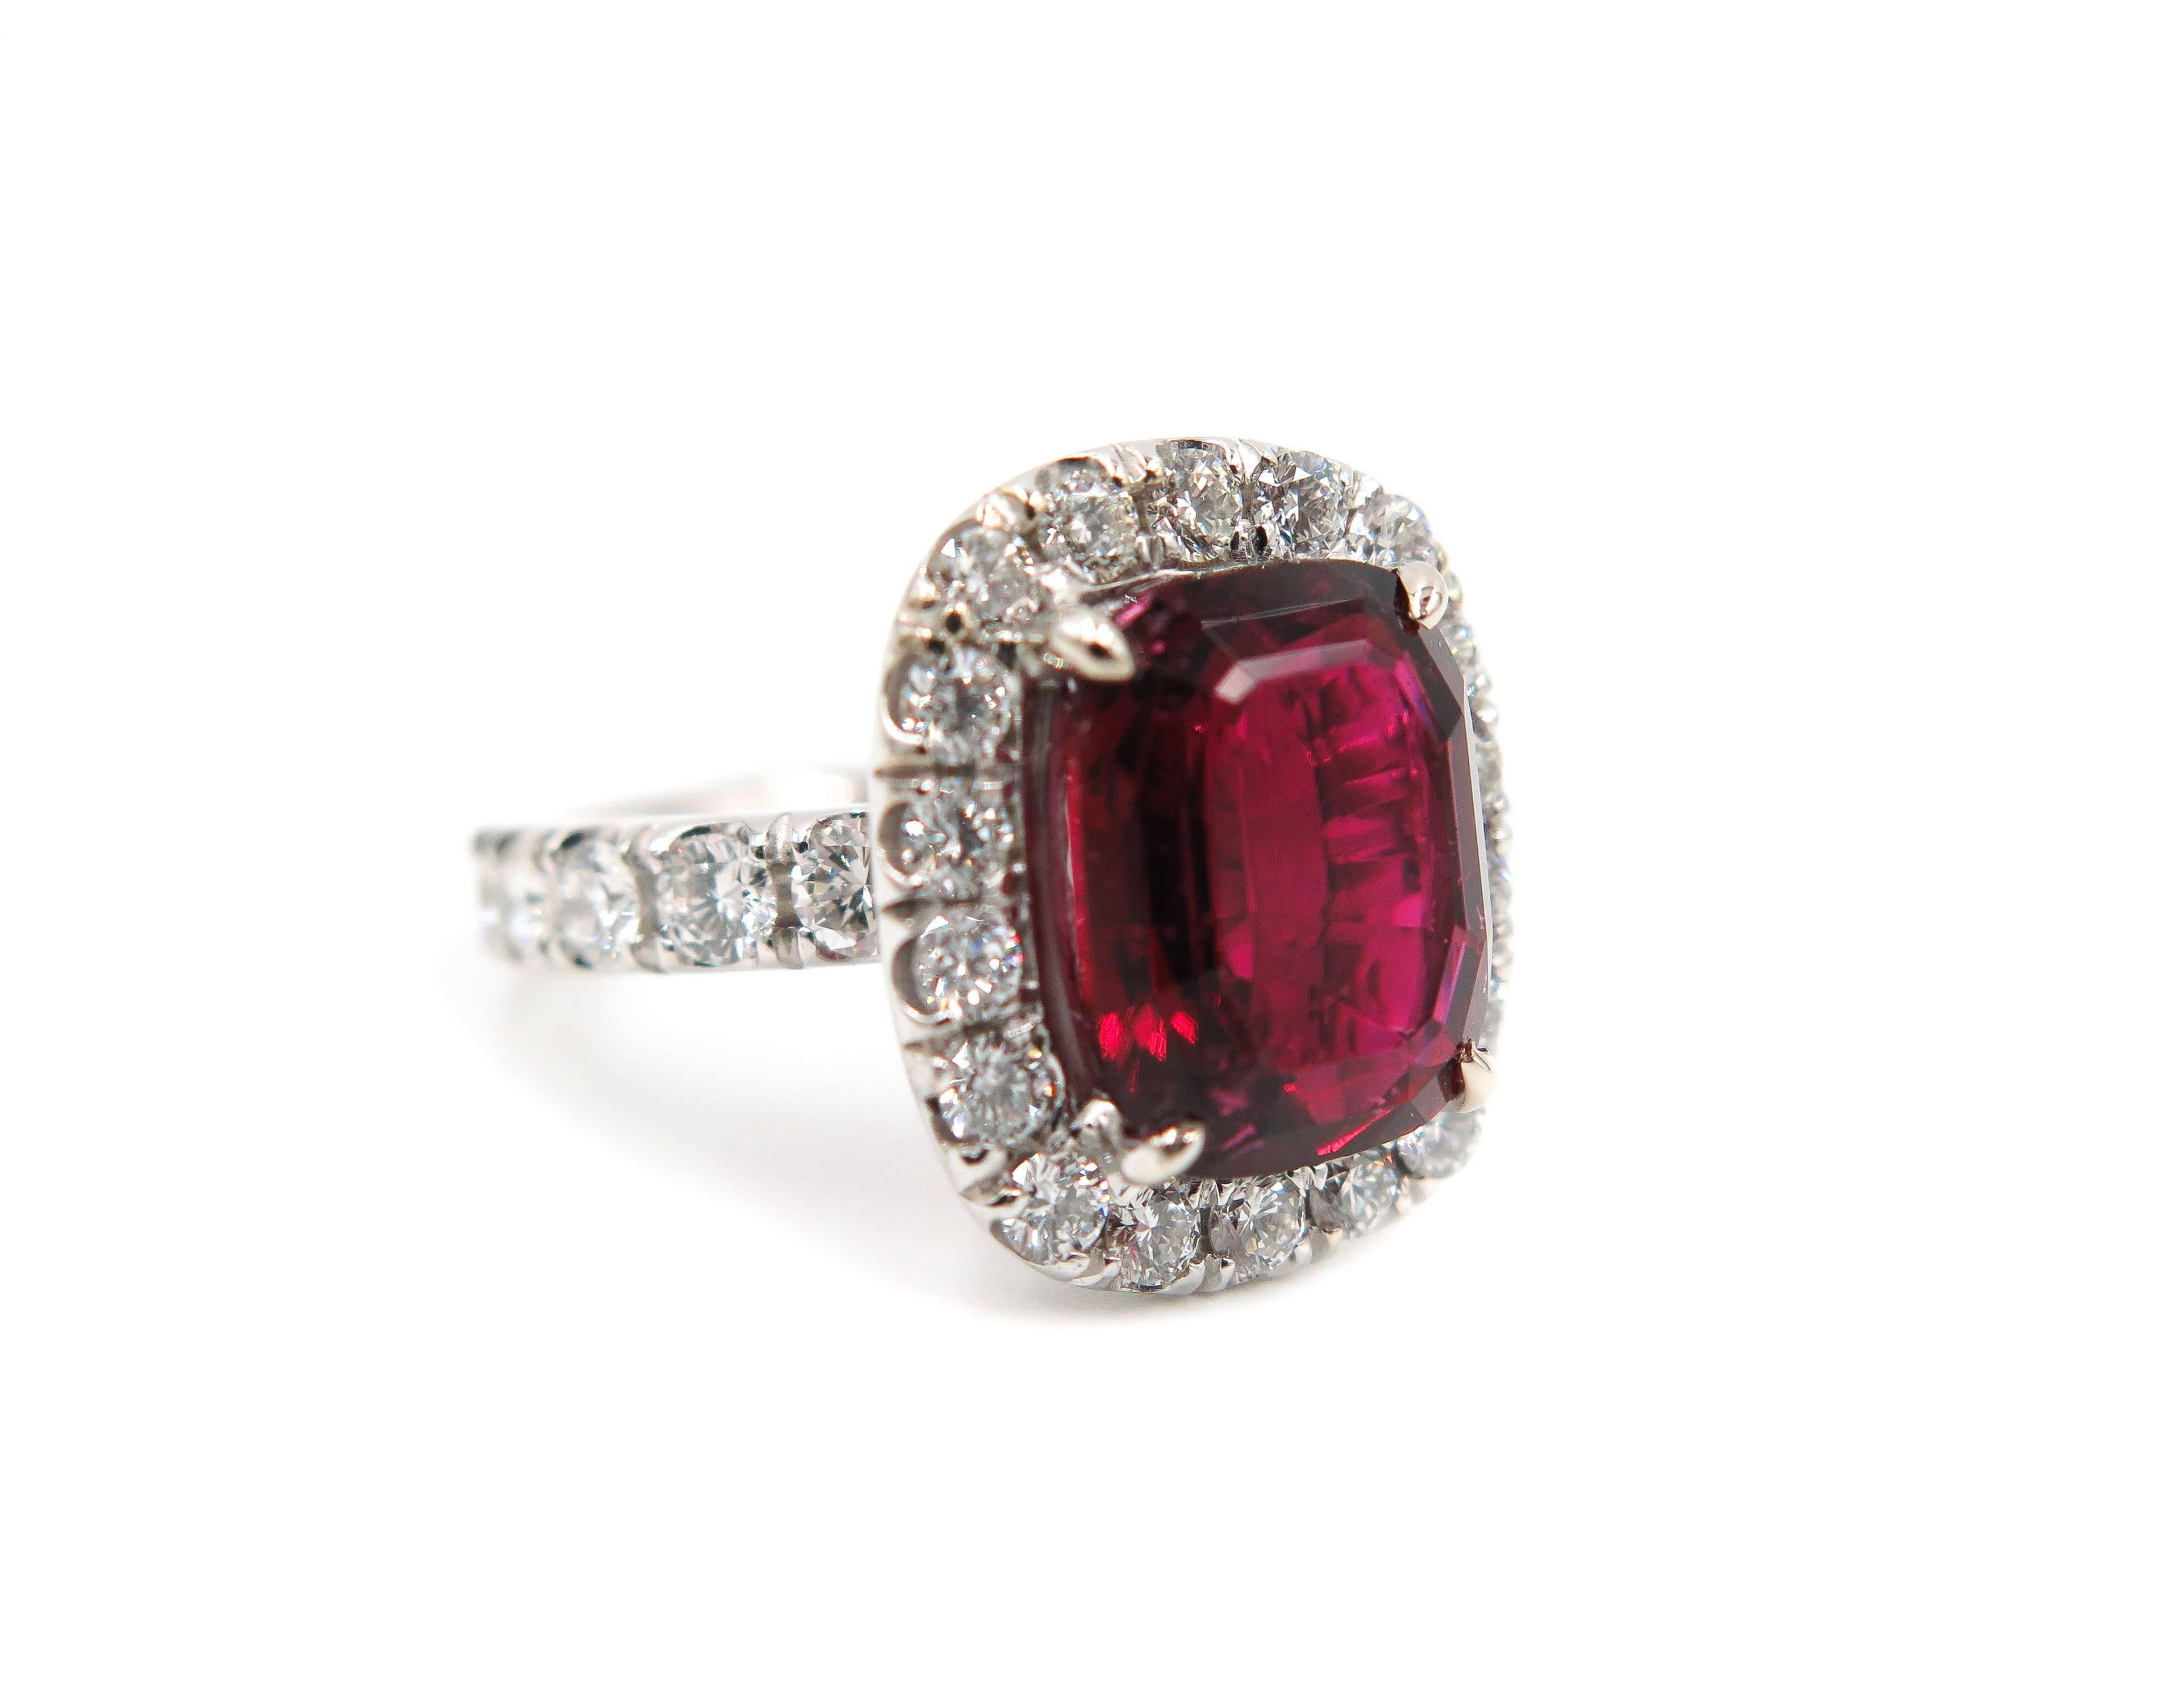 Excitement, amazement and surprise are just a few of the emotions evoked by a jewel of such distinction and versatility as is the case with this Rubellite and Diamond Ring.
A creation uniting the nobility of the platinum with the precious brilliance